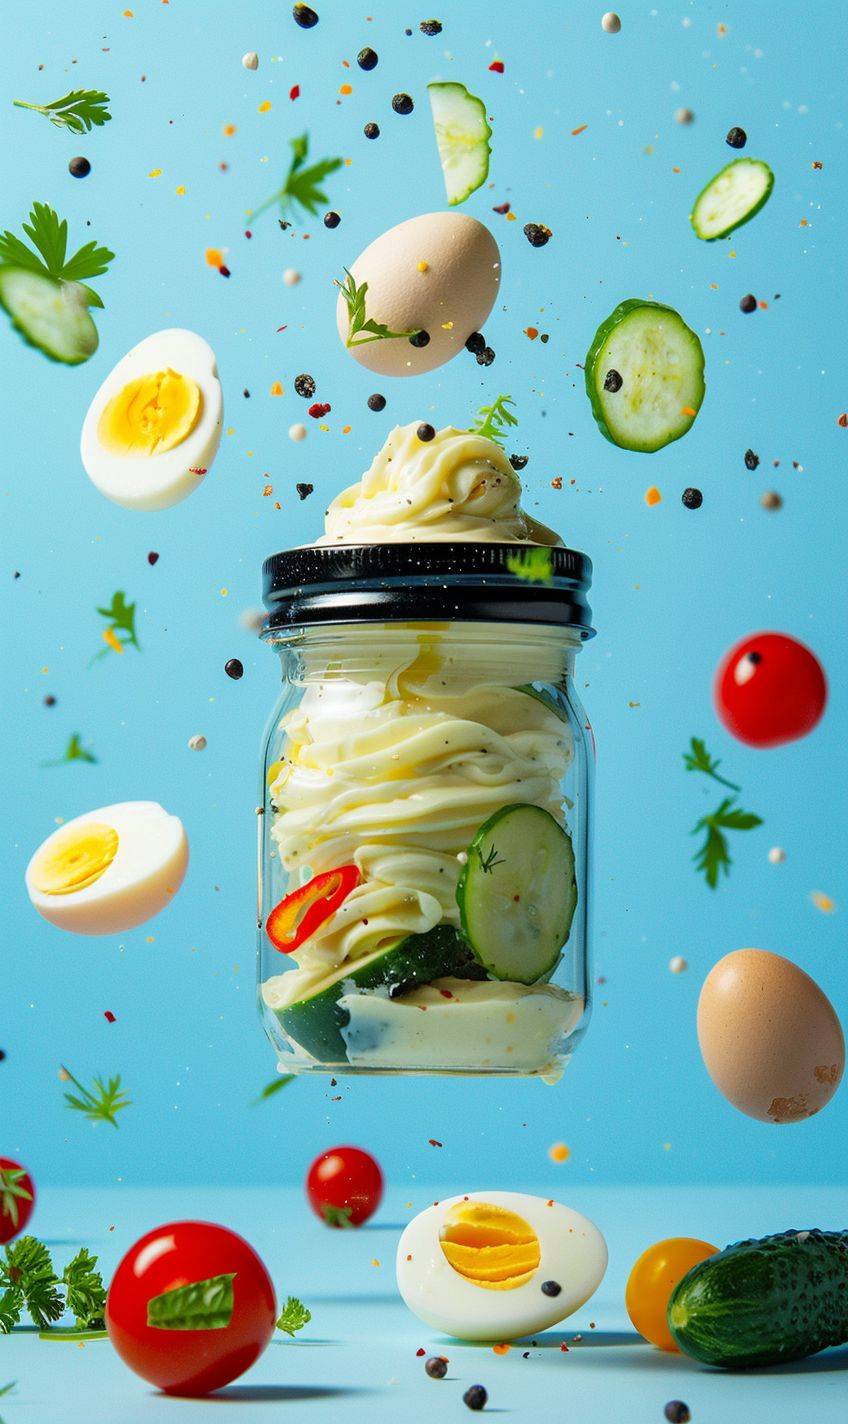 Large glass jar with mayonnaise with a black lid in flight. blue background. Eggs and vegetables are flying around. Realistic photo. Soft light. Studio light.